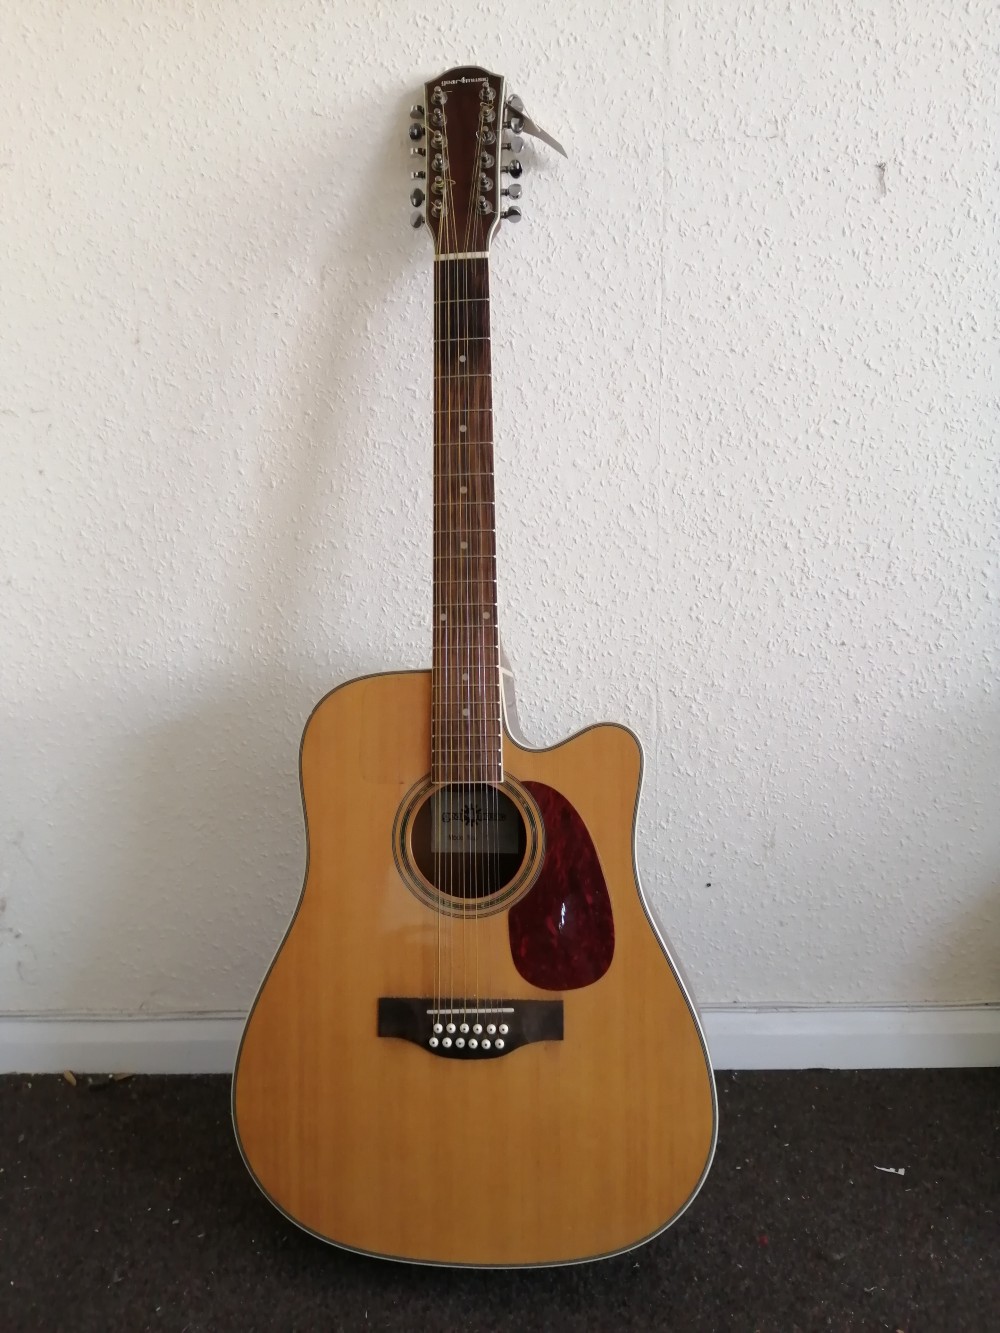 A Gear 4 Music Electro / Acoustic 12 string guitar